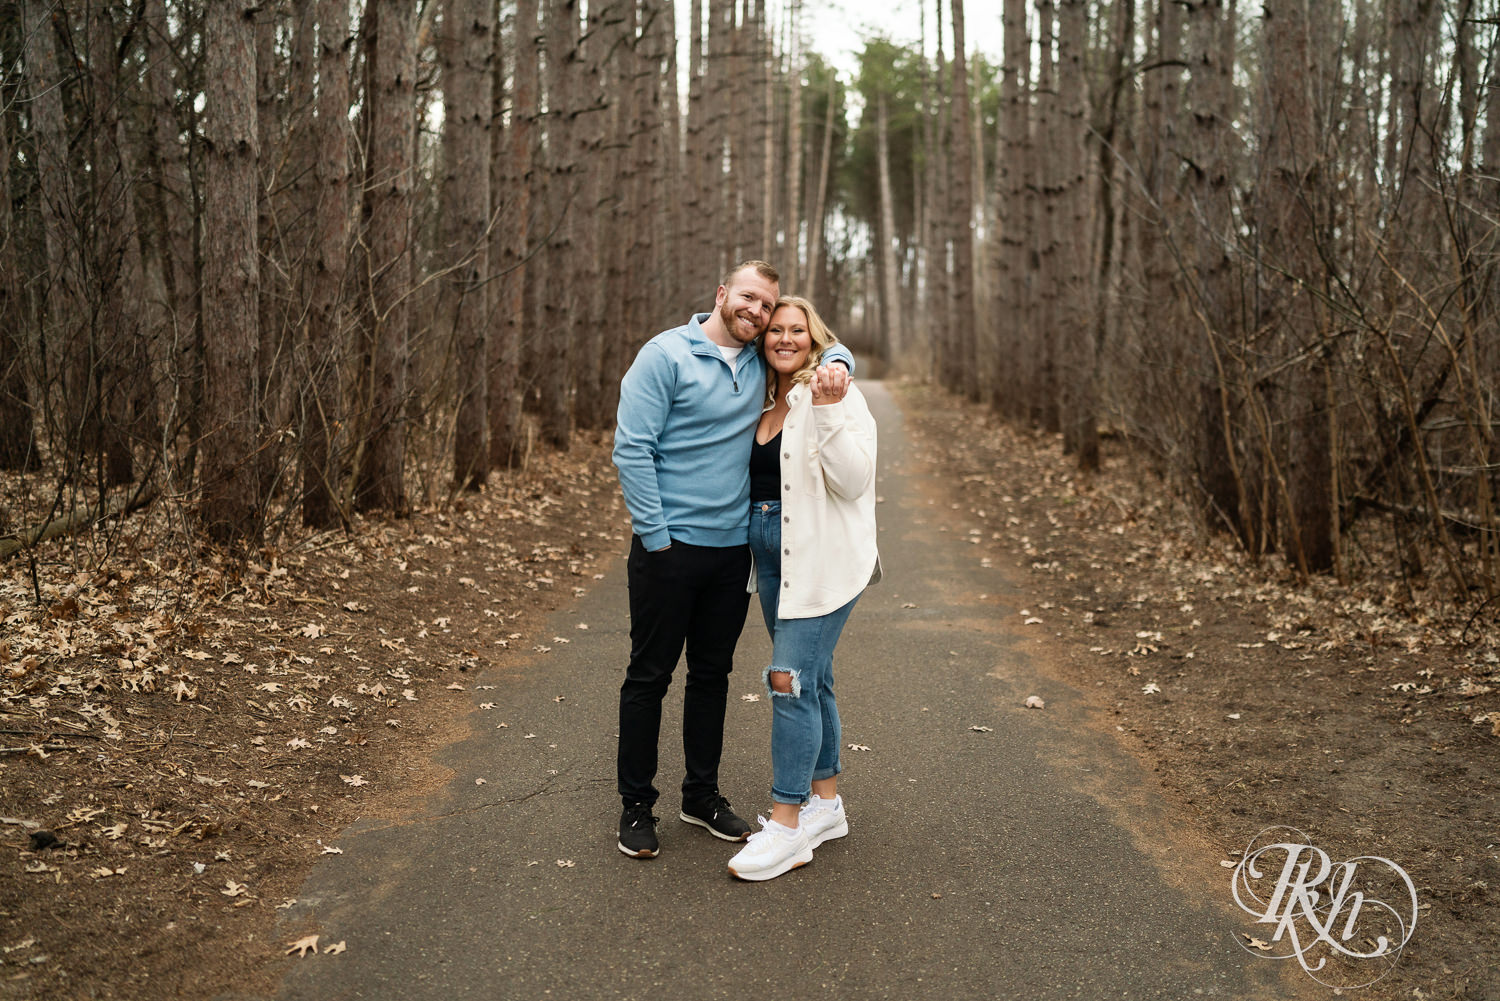 Man in blue shirt and woman in jeans smile between tall trees during engagement photography at Rice Creek Regional Trail in Shoreview, Minnesota.